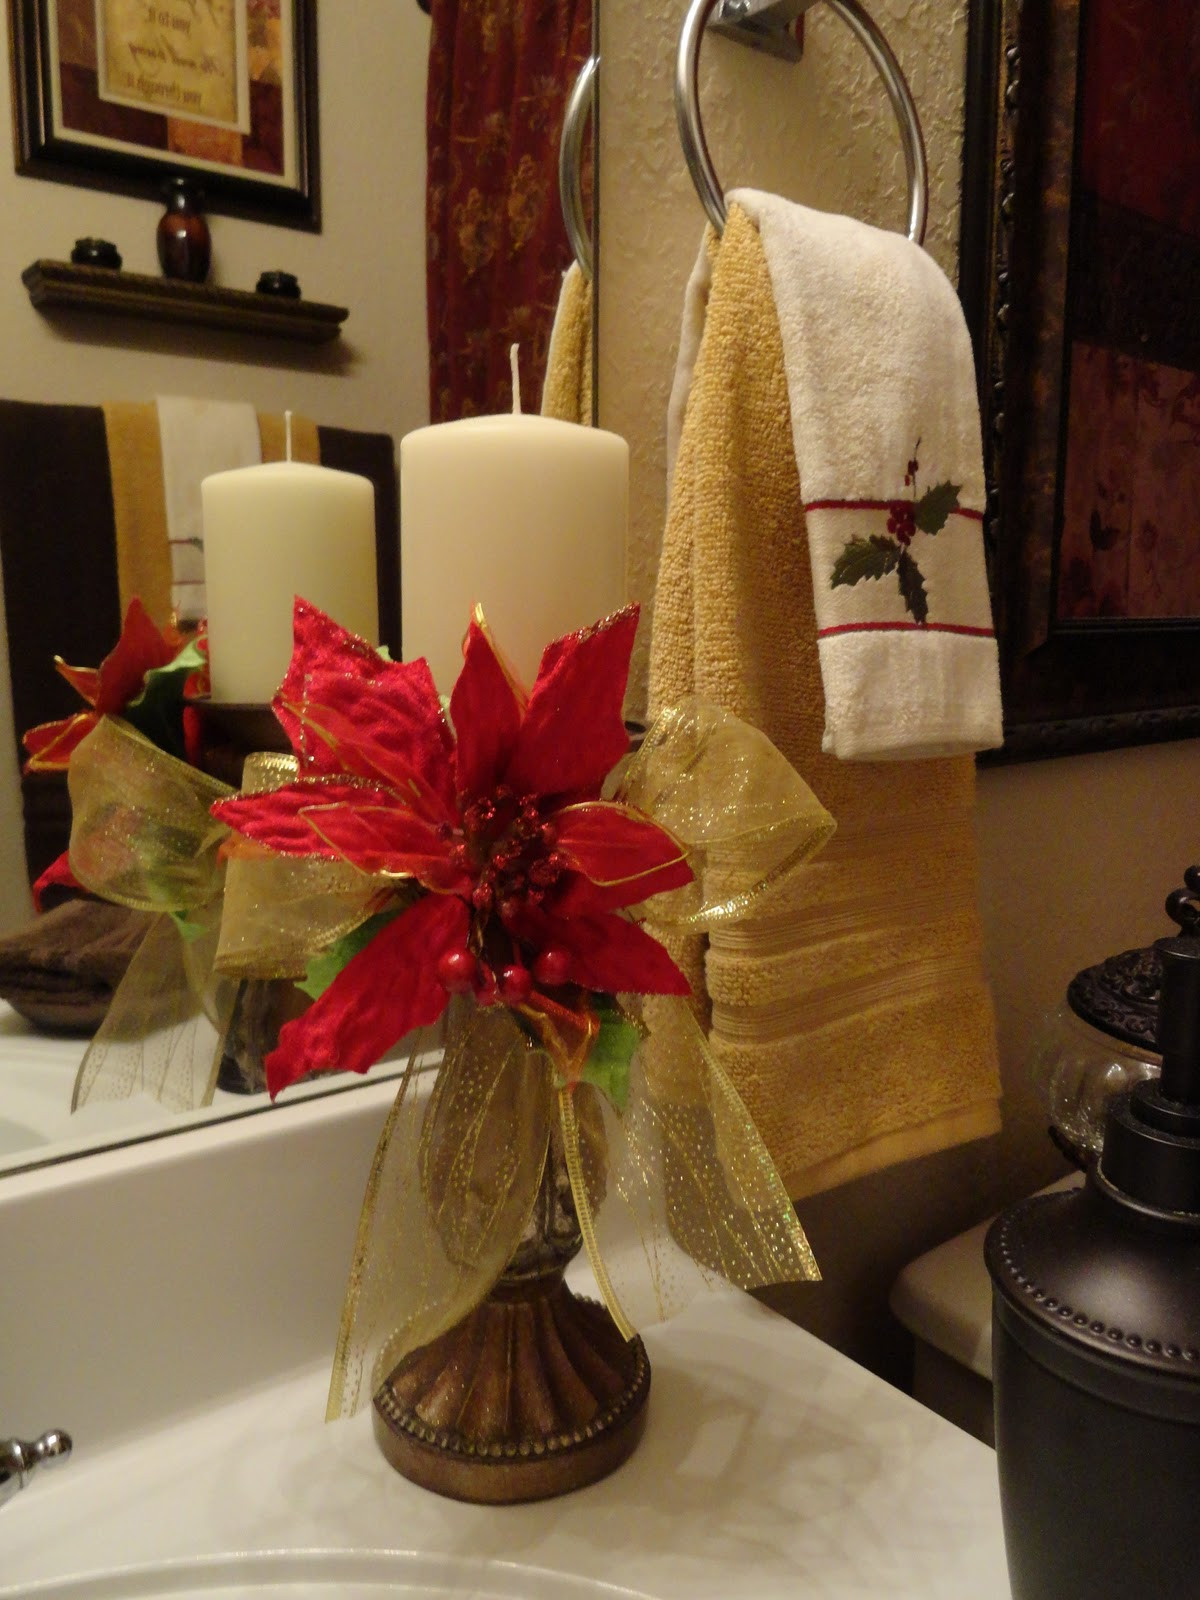 Christmas Bathroom Decor Ideas
 Our Home Away From Home A TOUCH OF CHRISTMAS IN THE GUEST